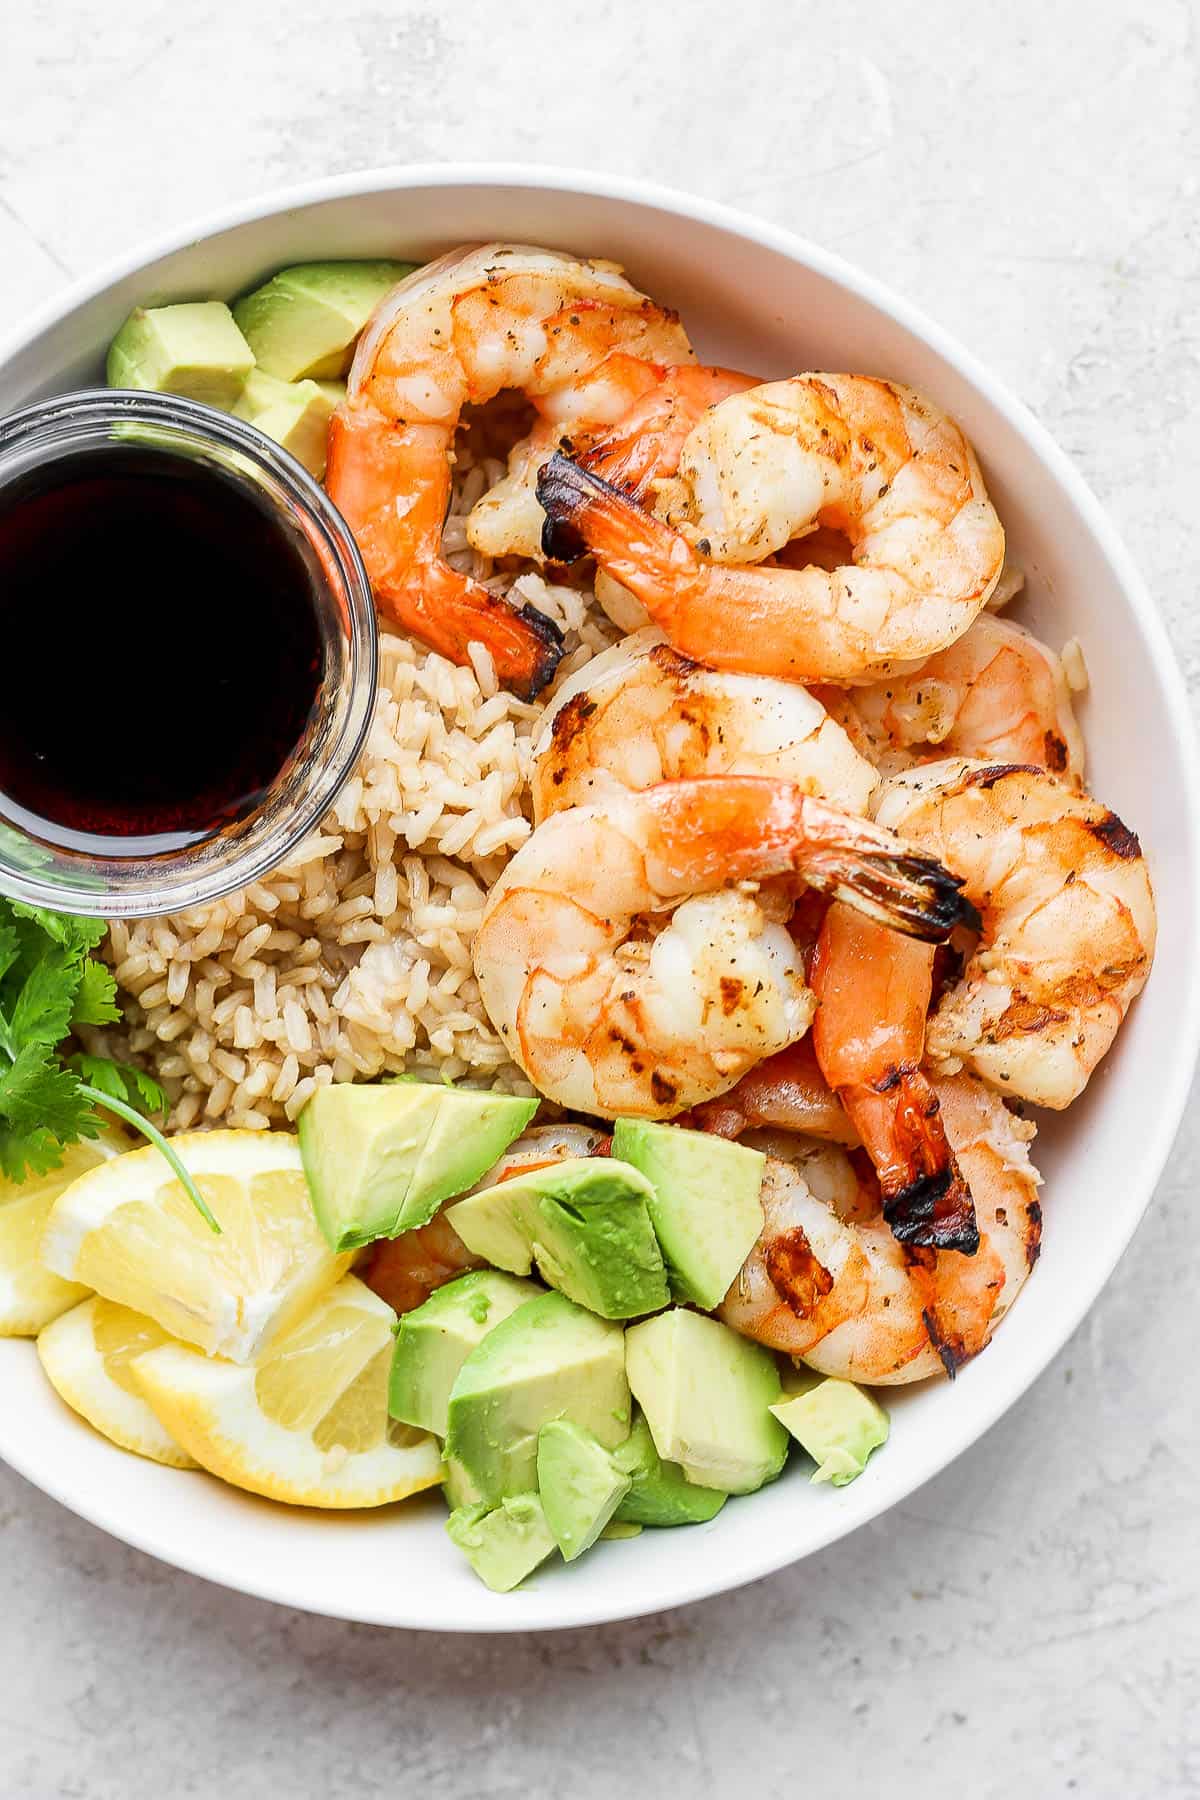 Shrimp rice bowl with a small dish of soy sauce.